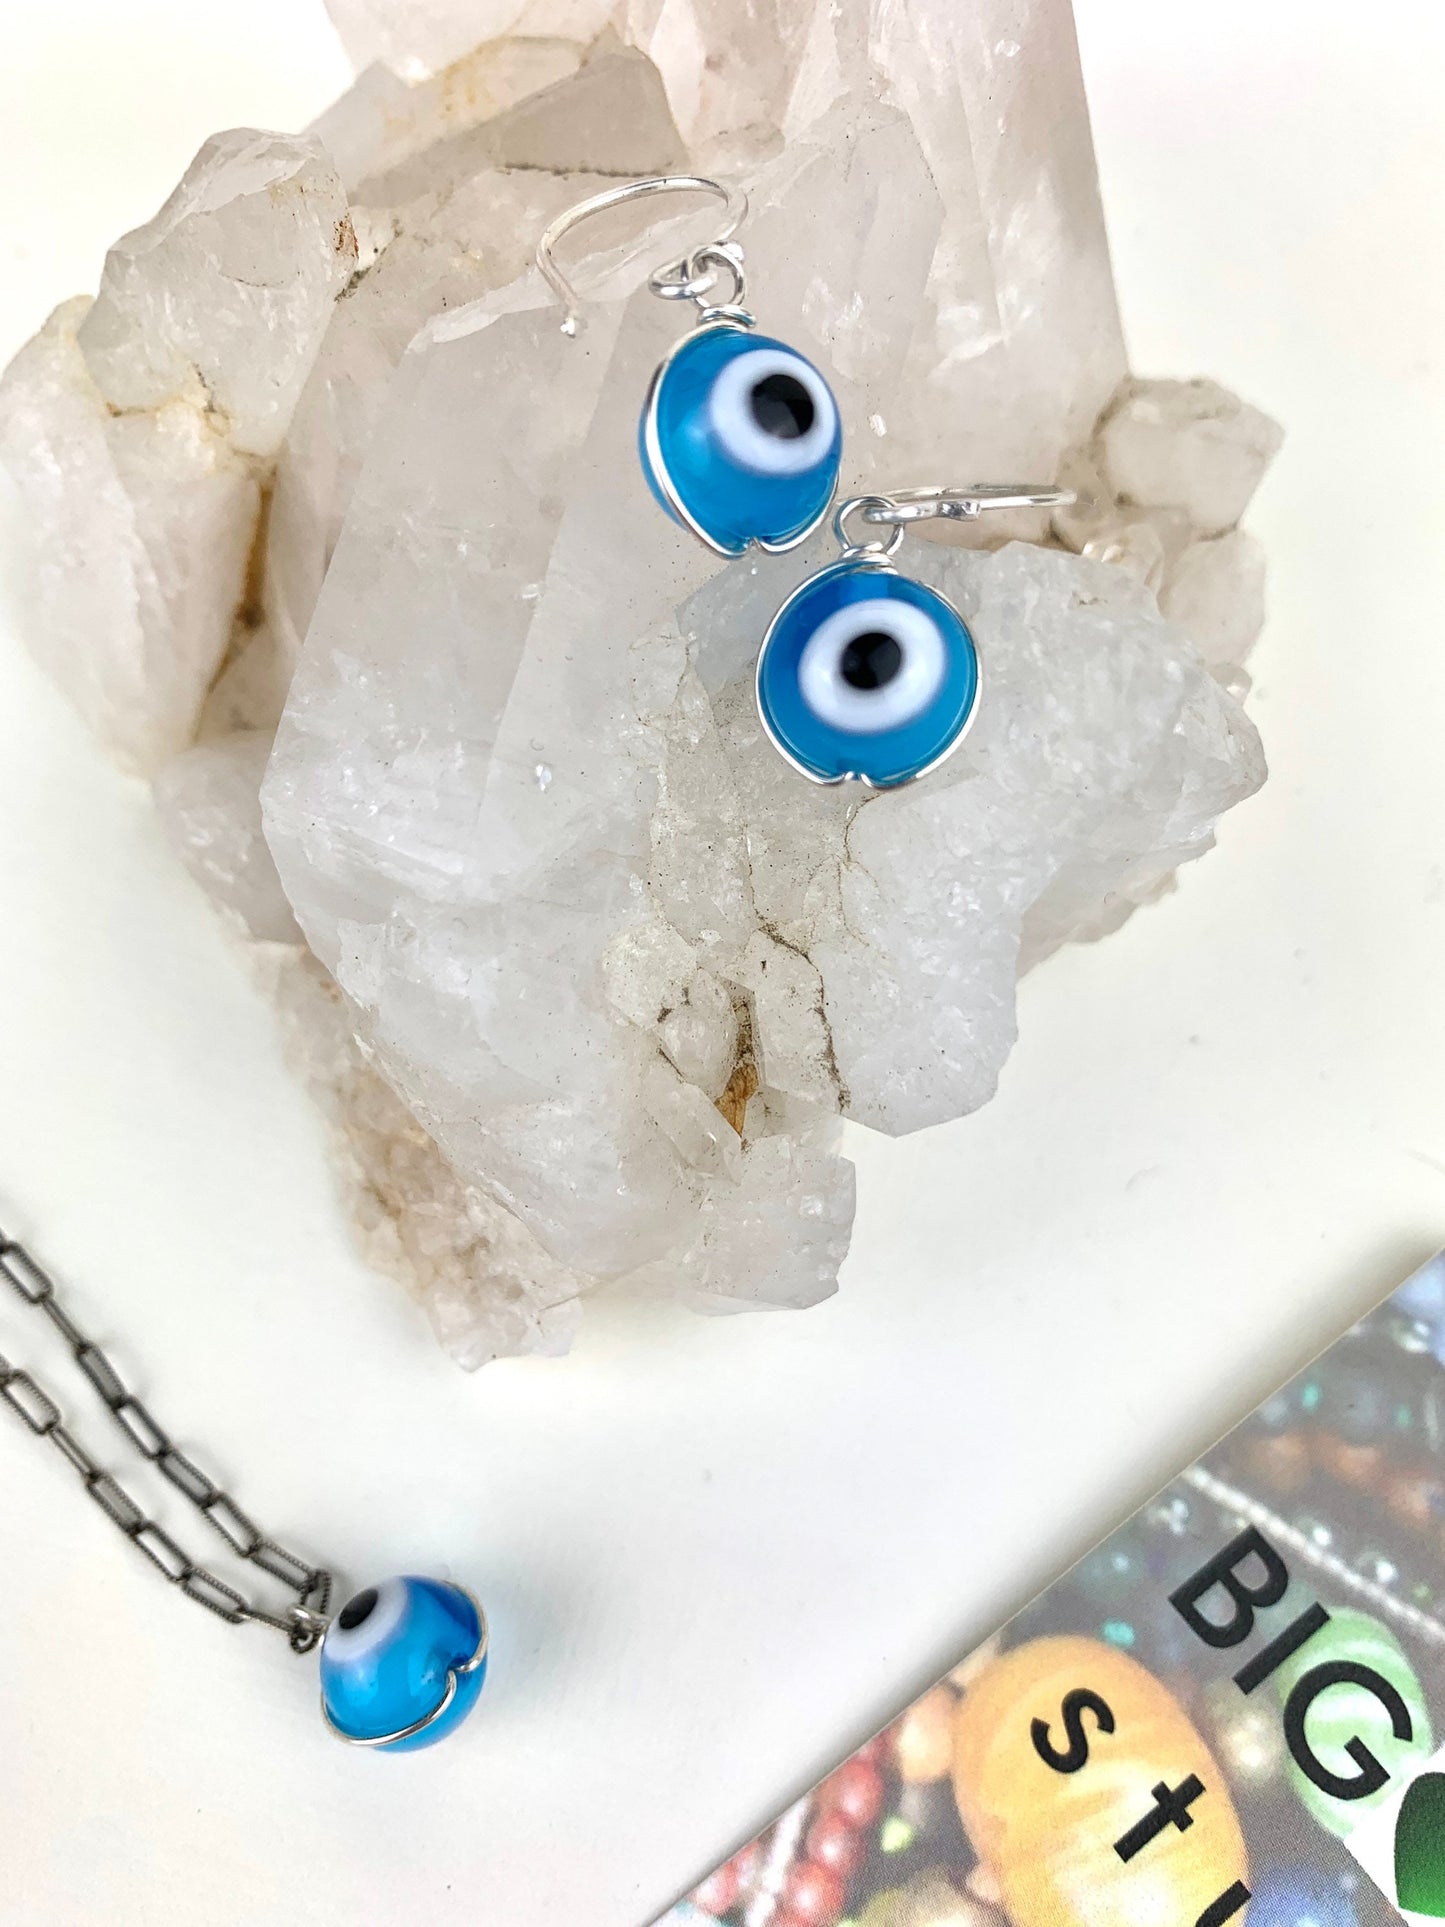 Evil eye charm necklace and earrings set - protection talisman - glass bead jewelry - blue beads - boho necklace for layering